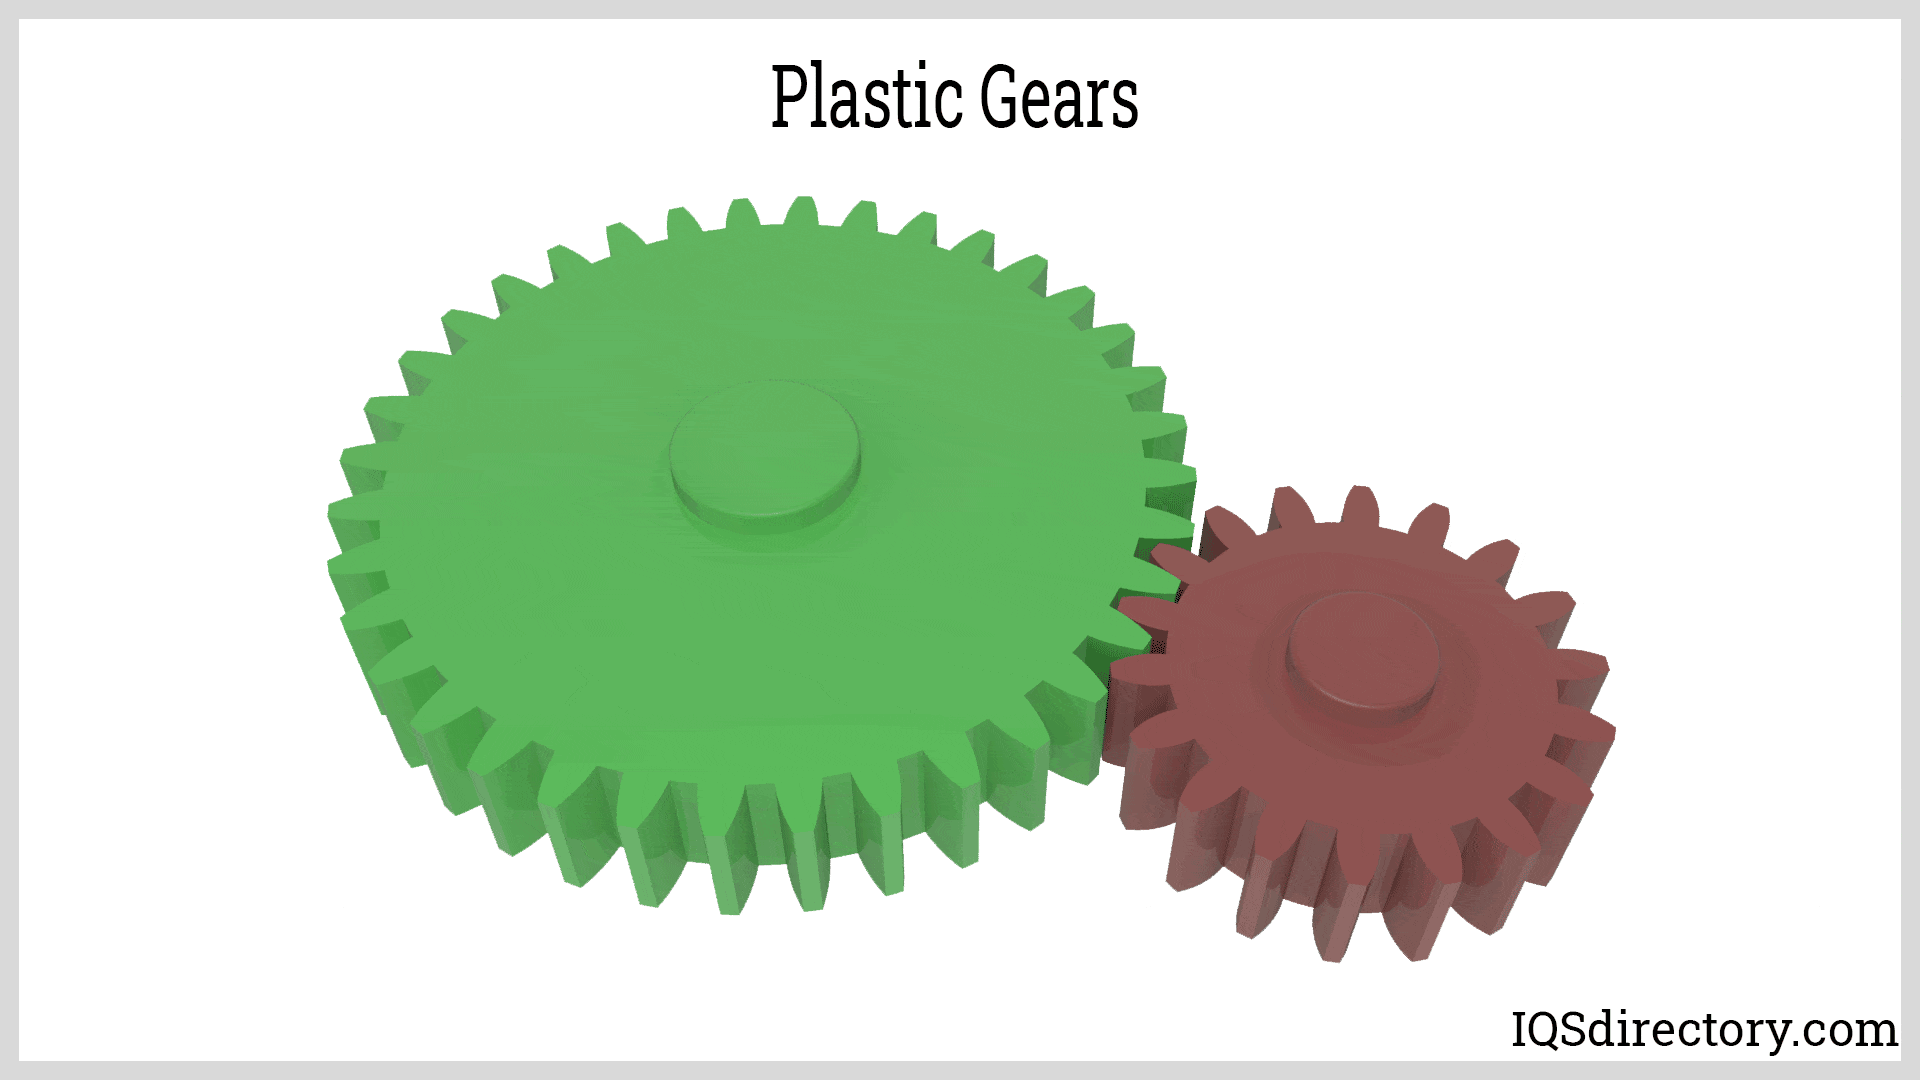 Plastic Gears - Design & Manufacturing by Performance Gear Systems